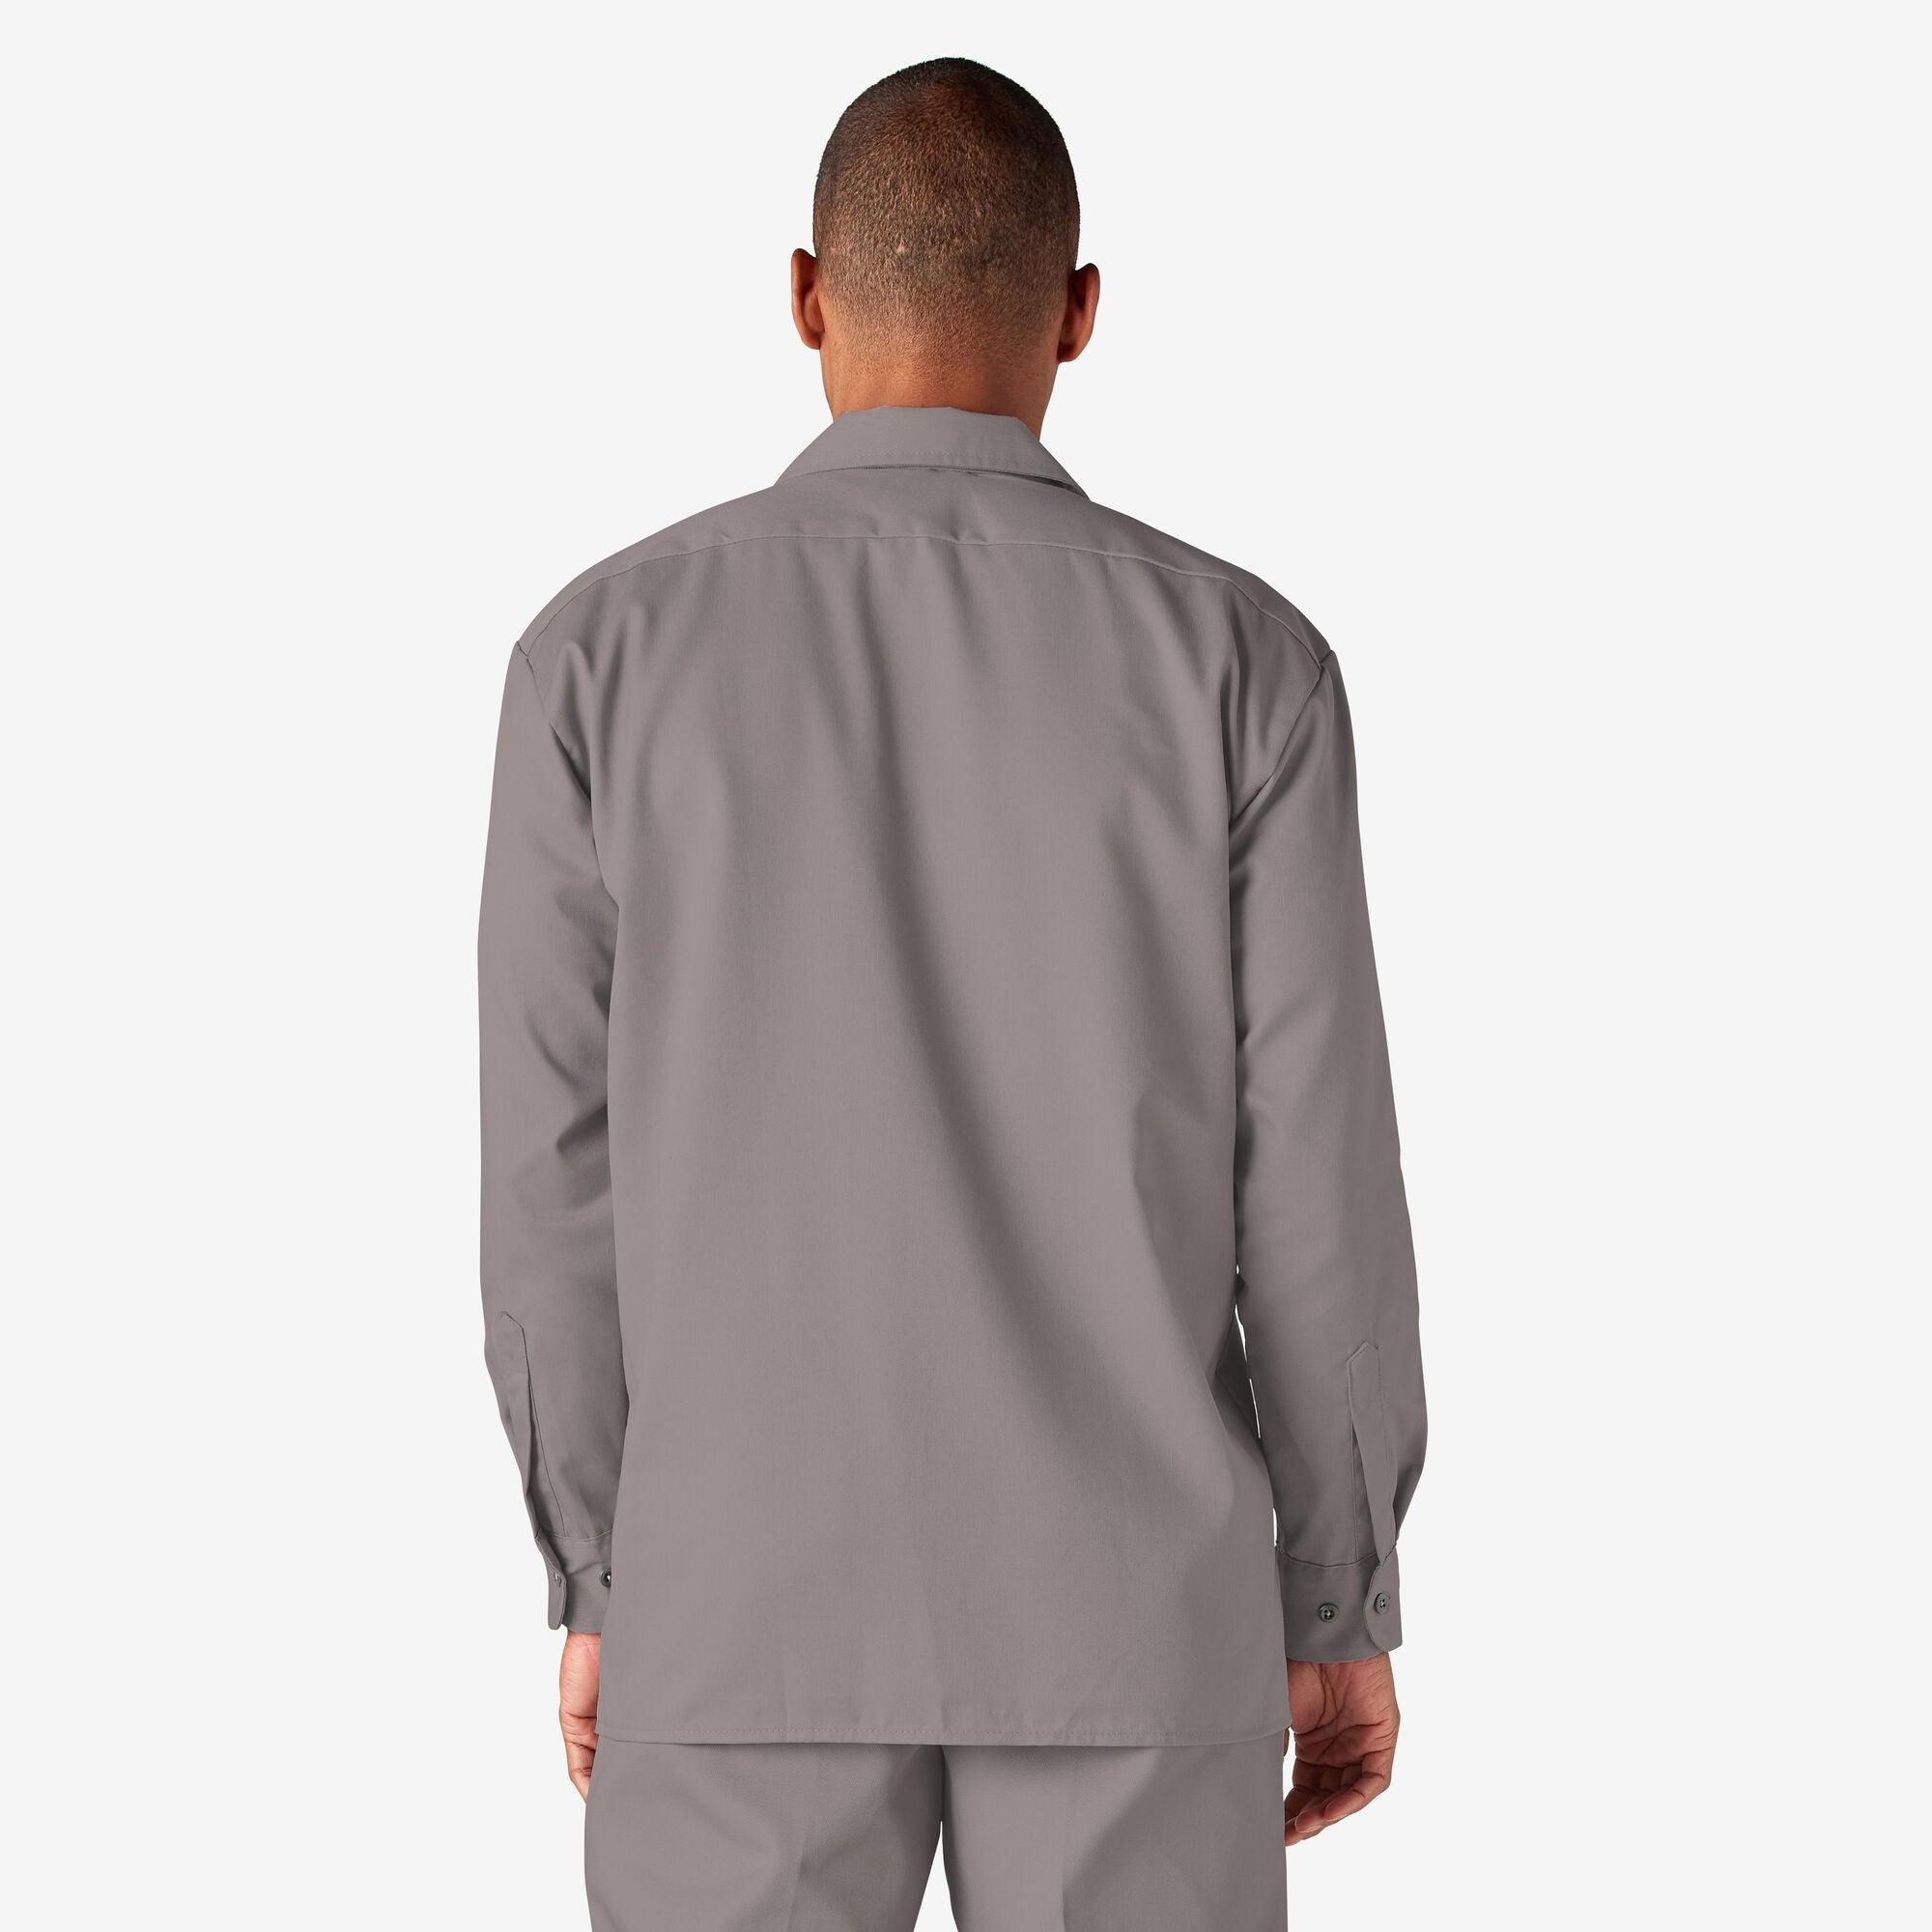 Long Sleeve Work Shirt, Silver - Purpose-Built / Home of the Trades